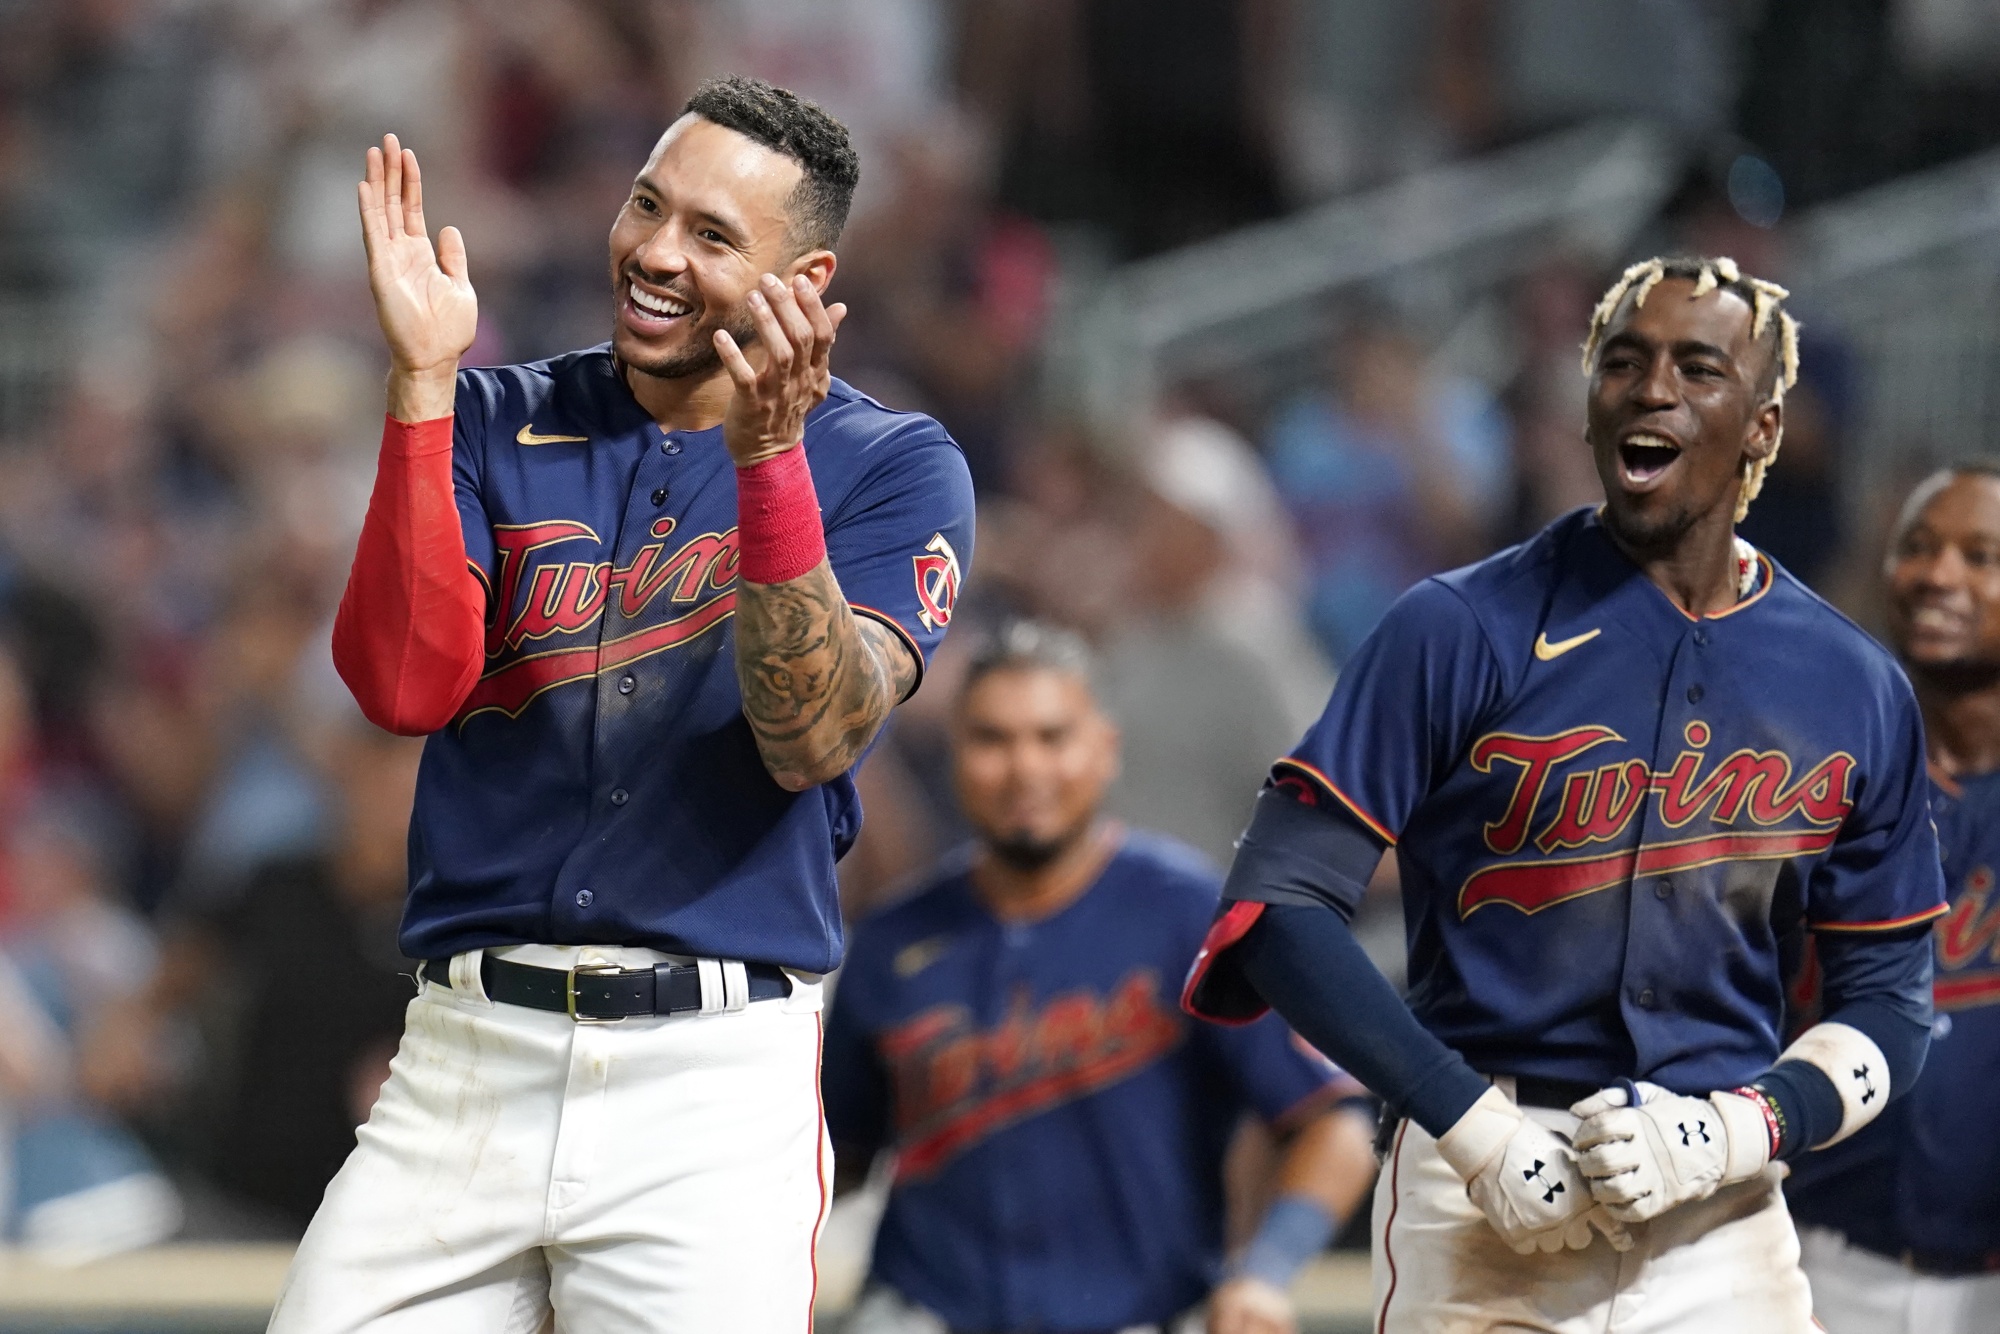 Mets' talks with Carlos Correa expected to pick up again soon